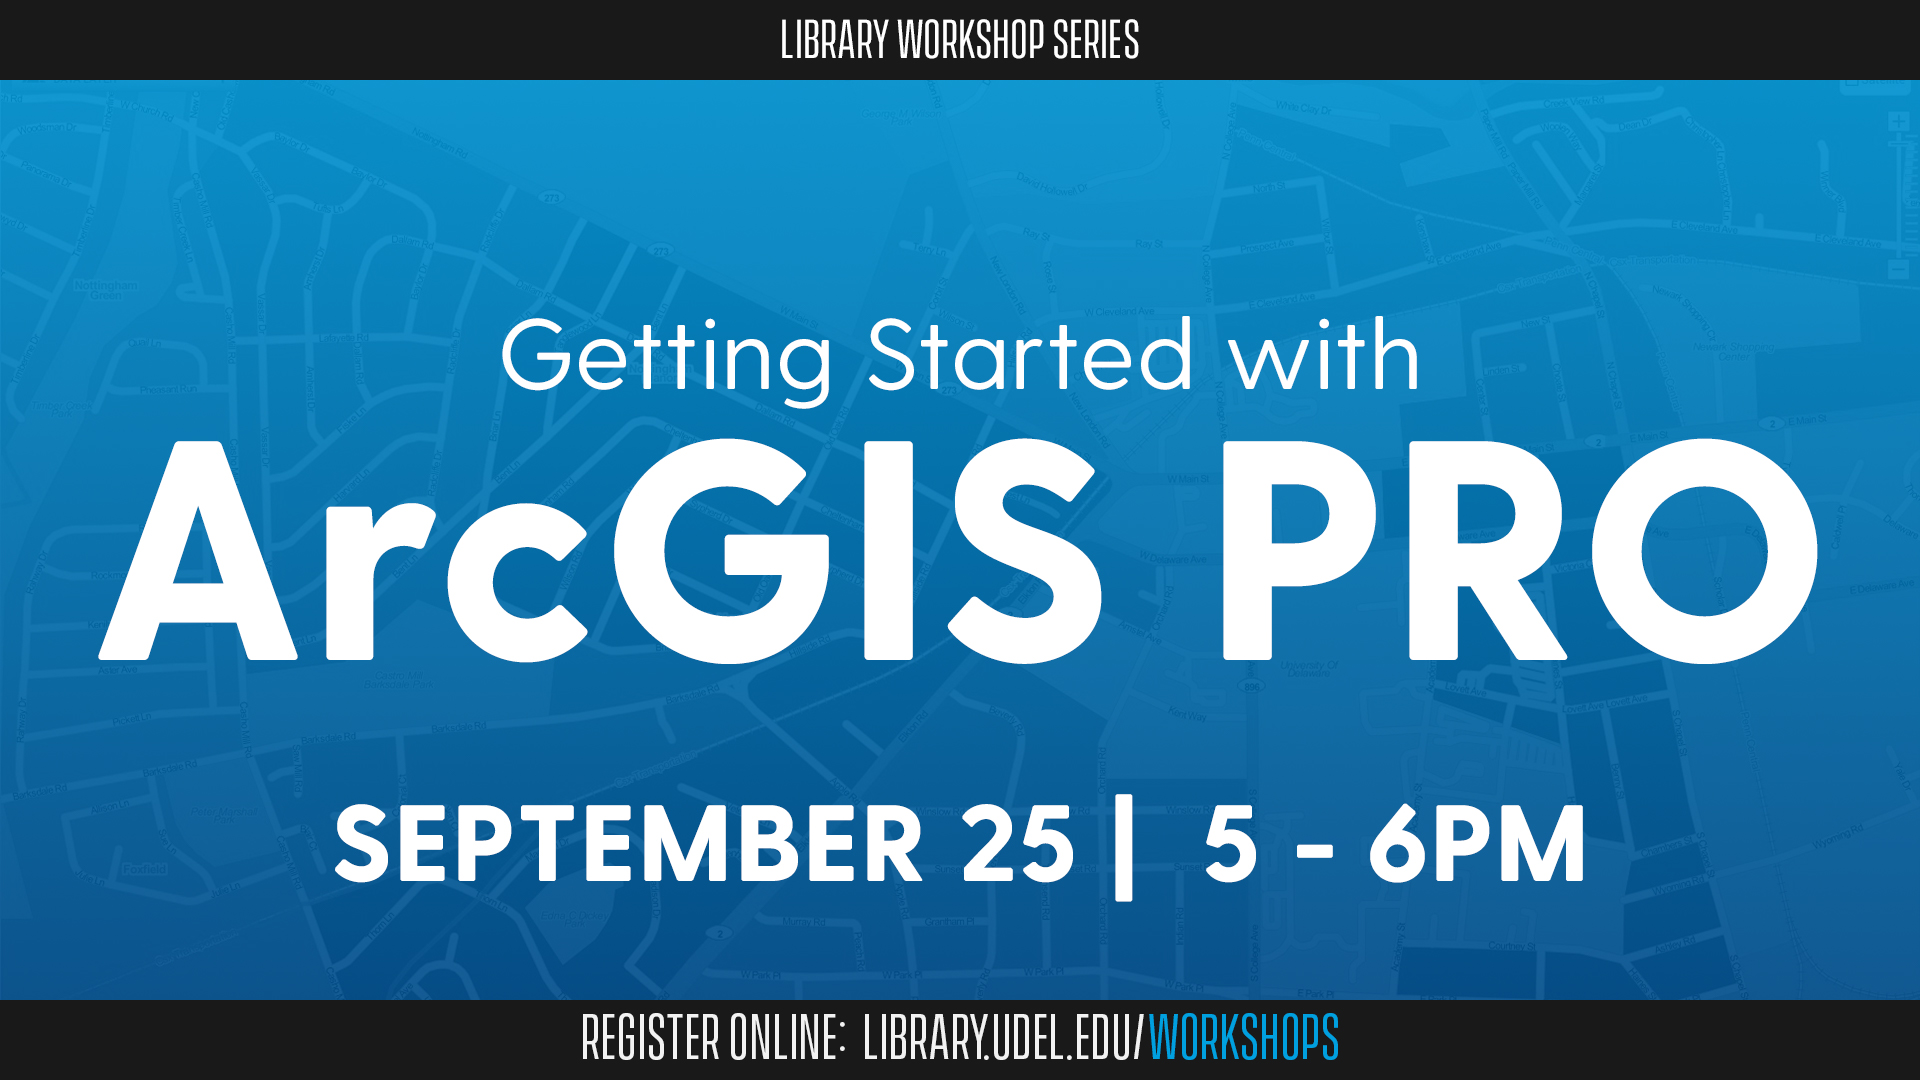 Getting Started with ArcGIS Pro